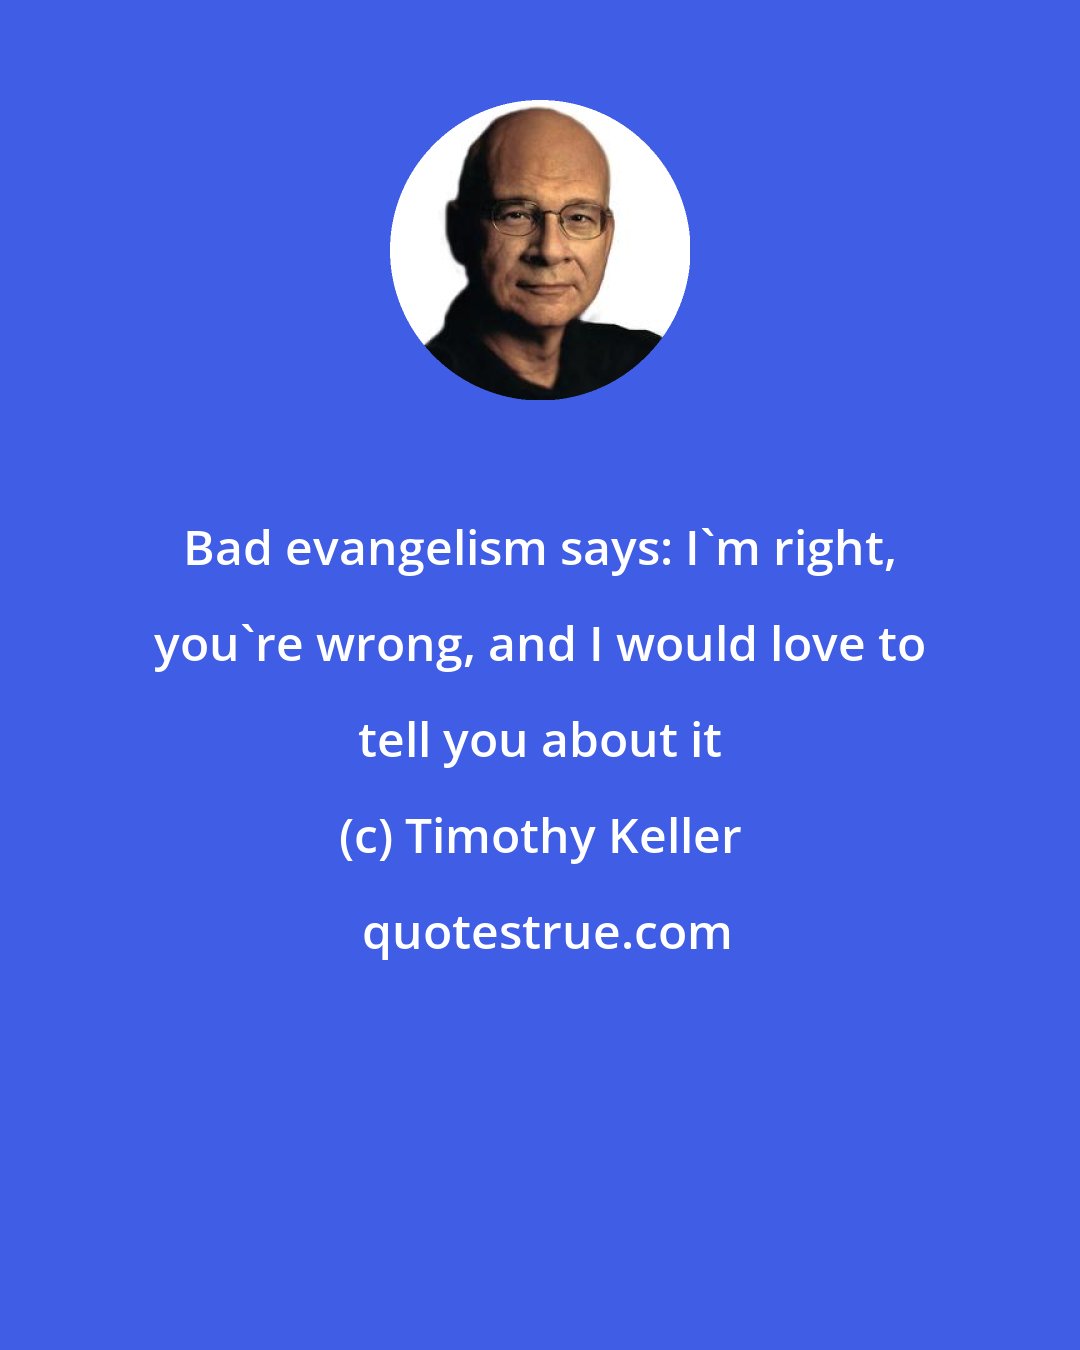 Timothy Keller: Bad evangelism says: I'm right, you're wrong, and I would love to tell you about it